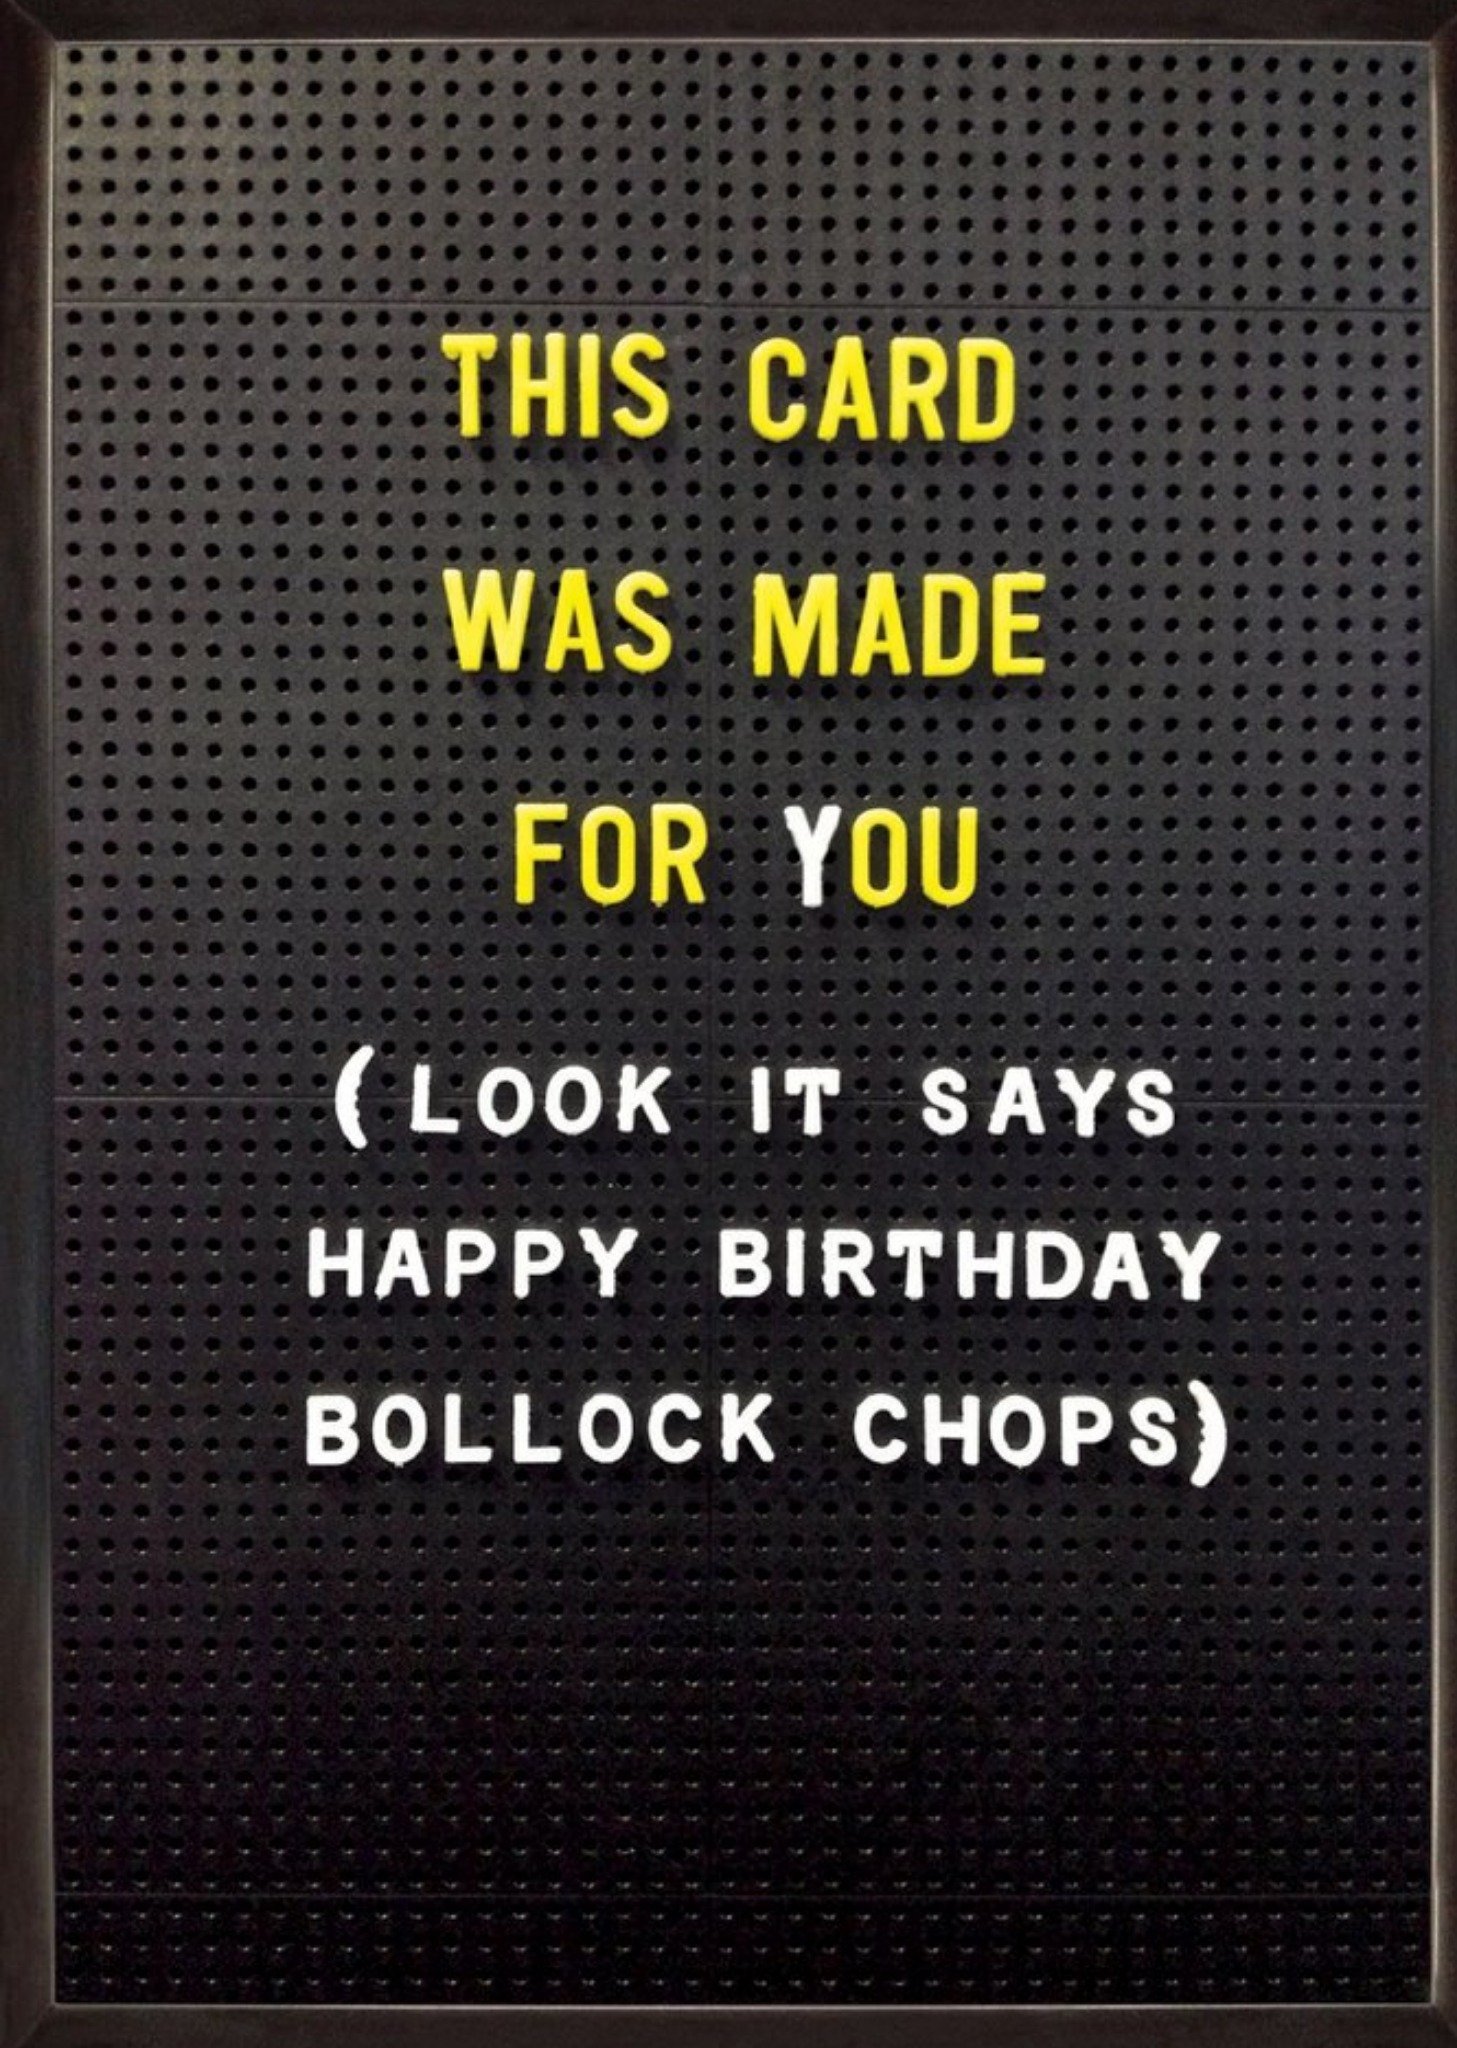 Brainbox Candy Rude Funny Rude Funny This Card Was Made For You Happy Birthday Bollock Chops Card, L